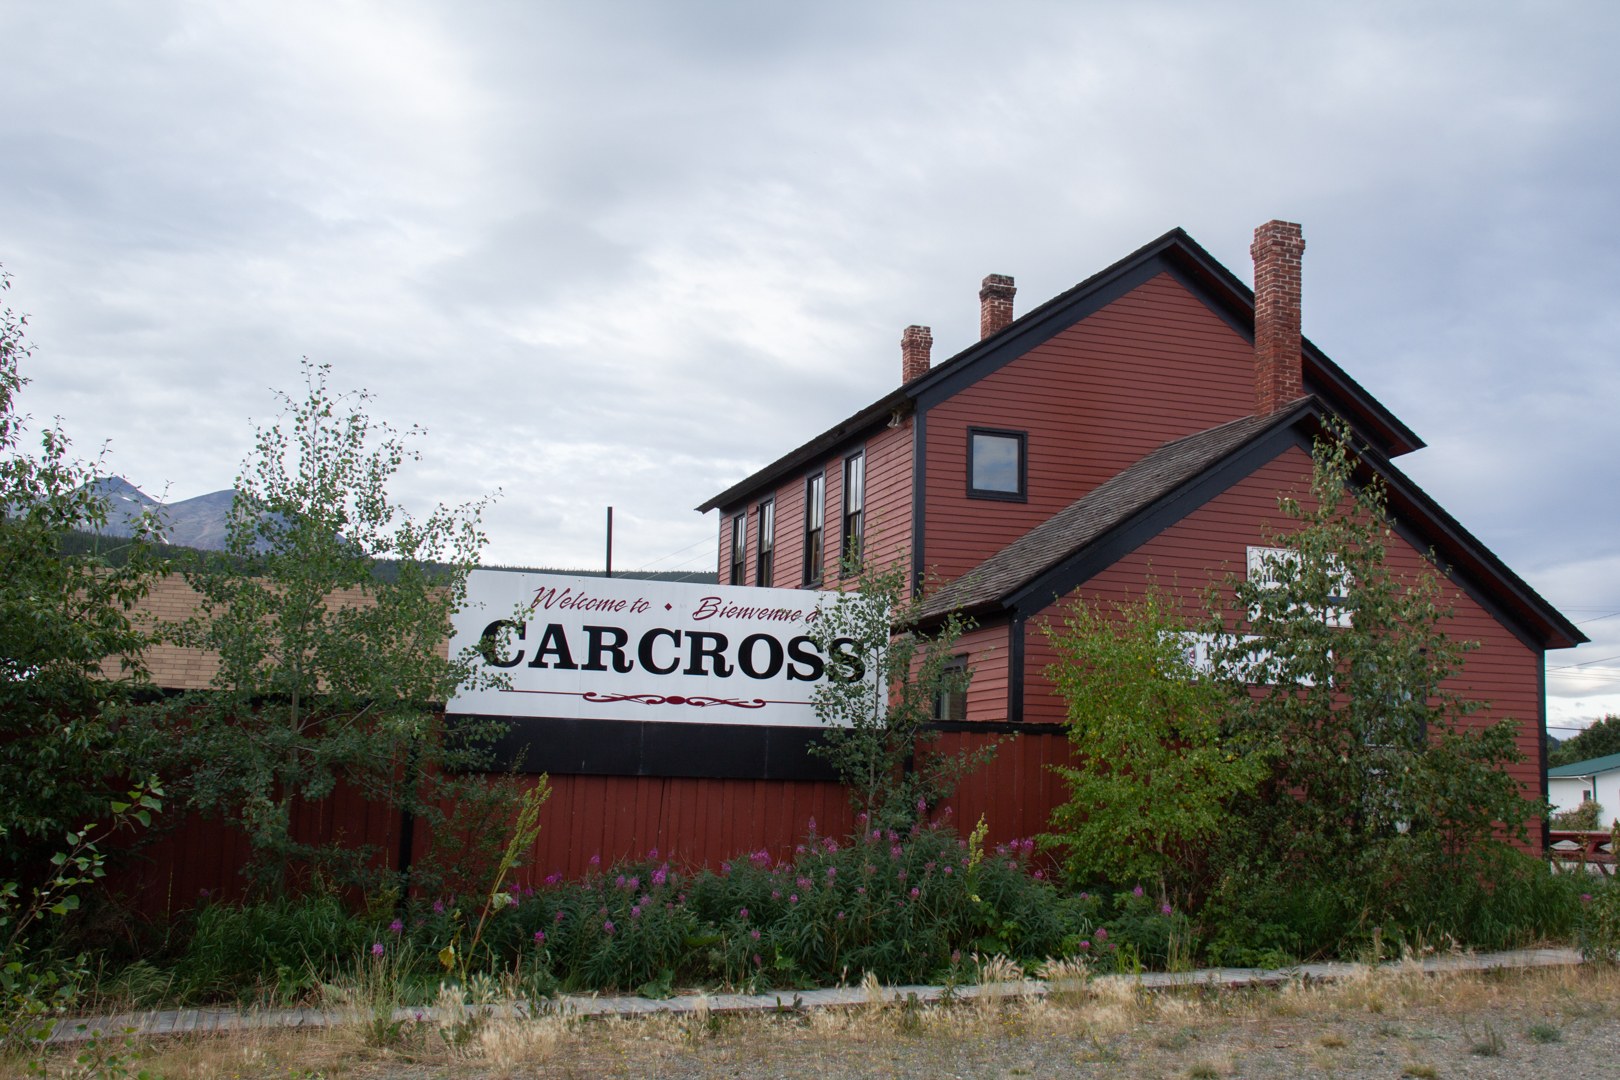 Welcome to Carcross